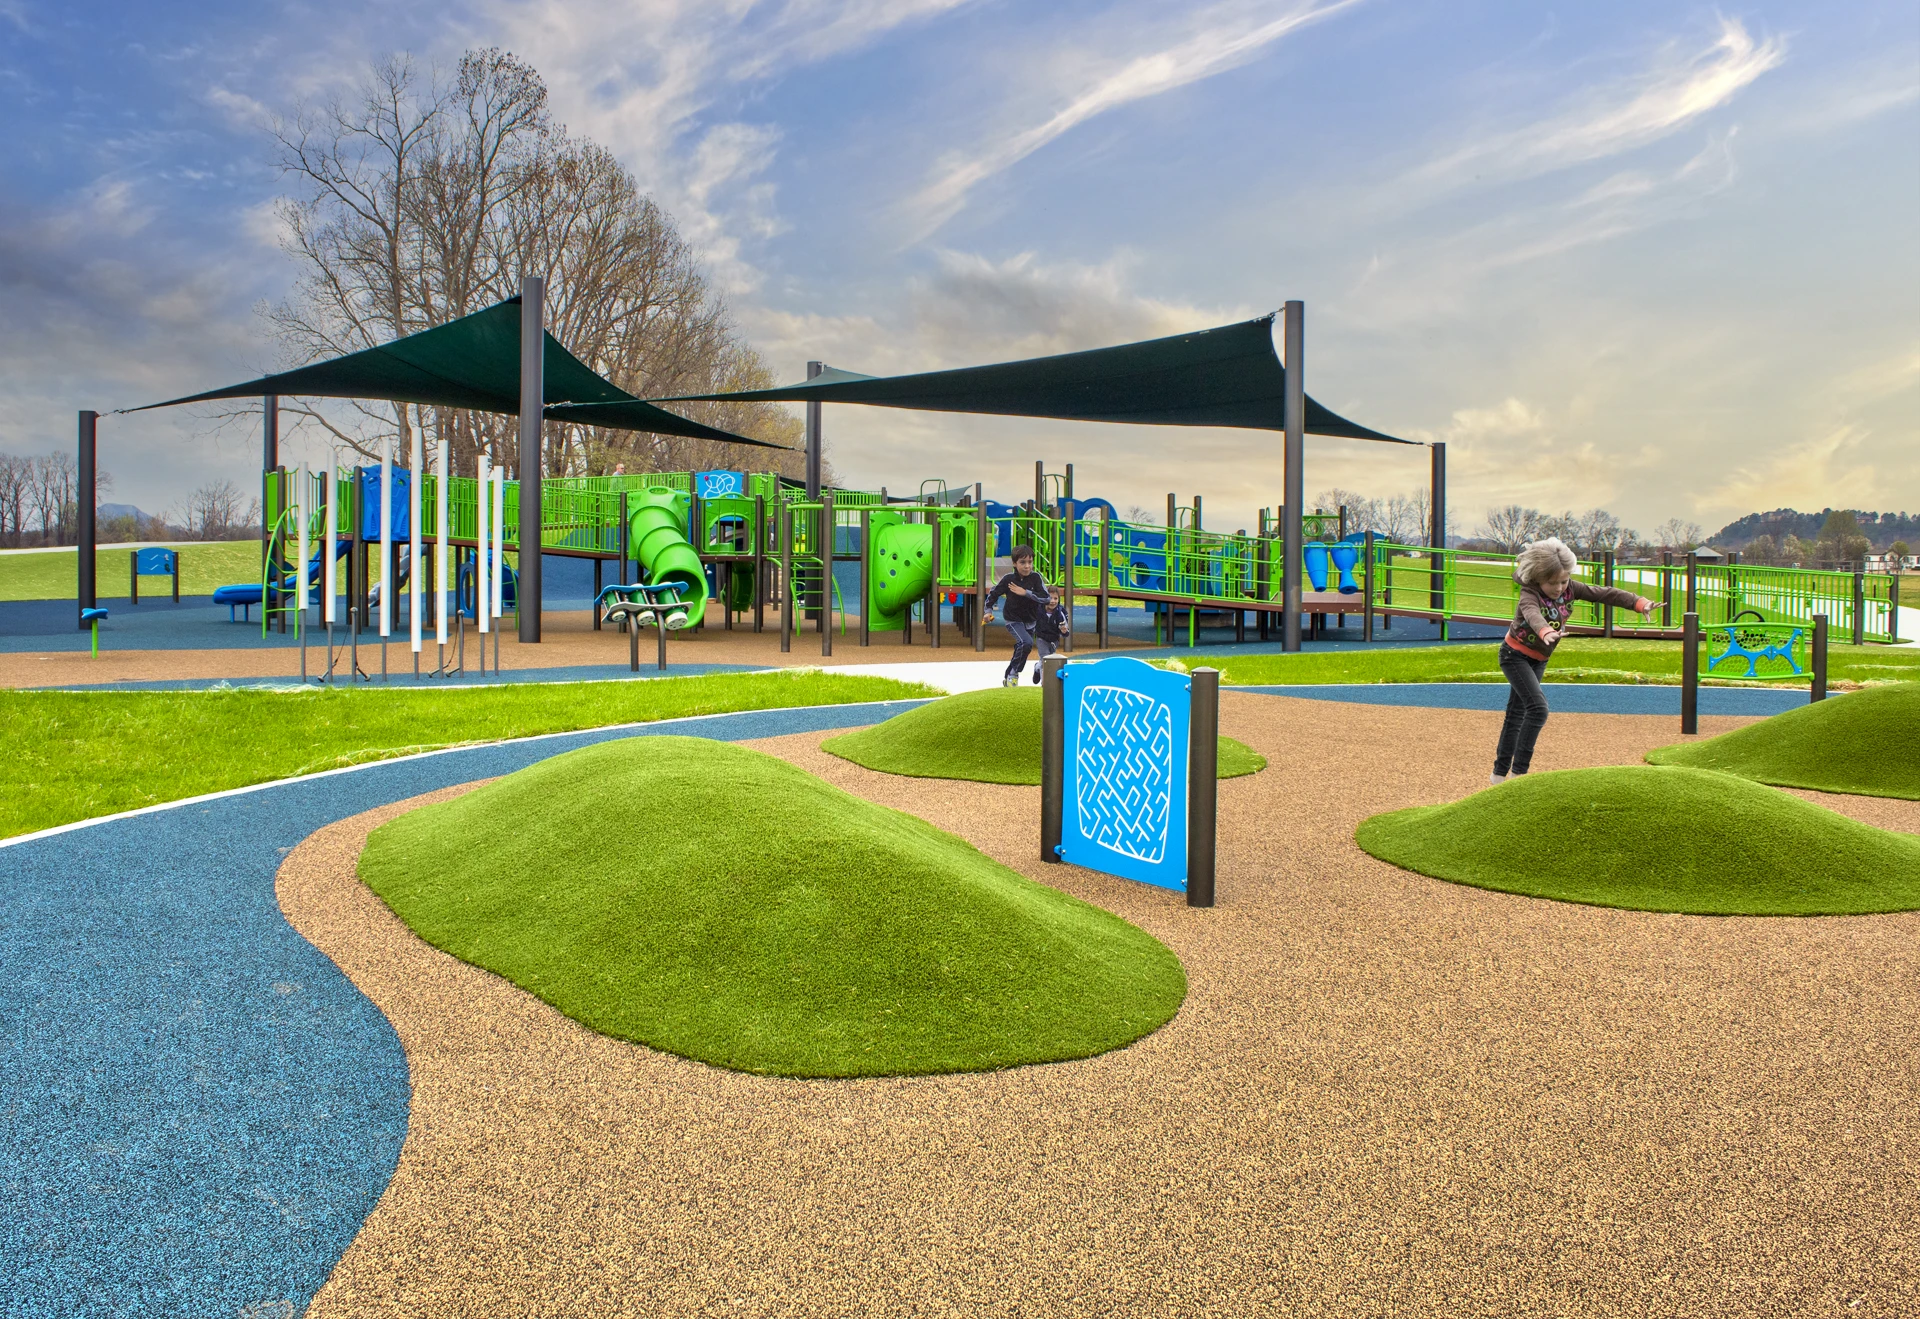 Two Rivers Park Inclusive Playground - Little Rock, AR